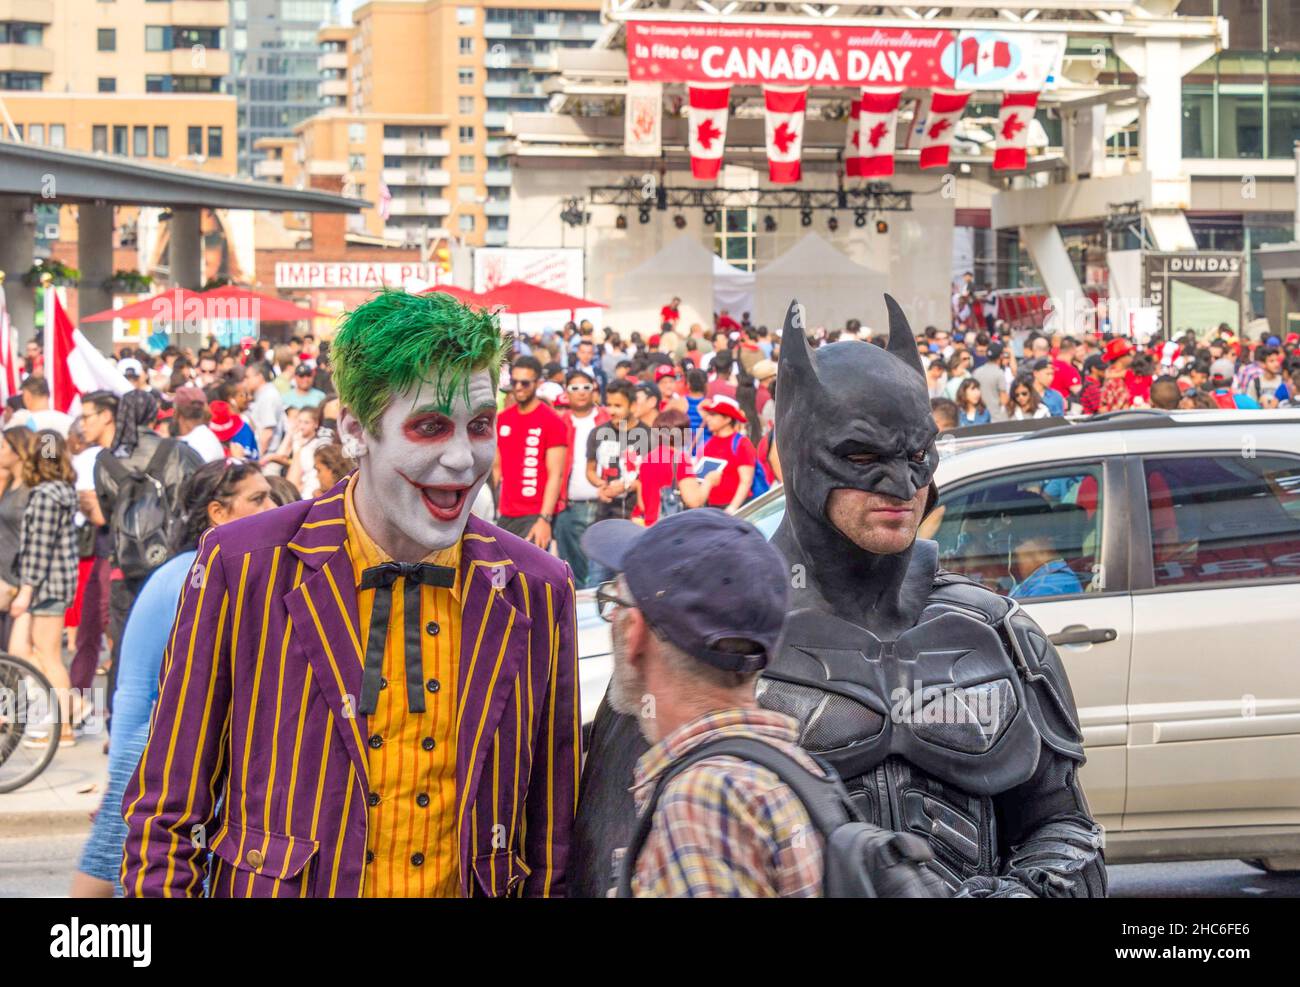 Canada Day celebrations in Toronto: Busker performers Batman and Joker in Dundas Square Stock Photo